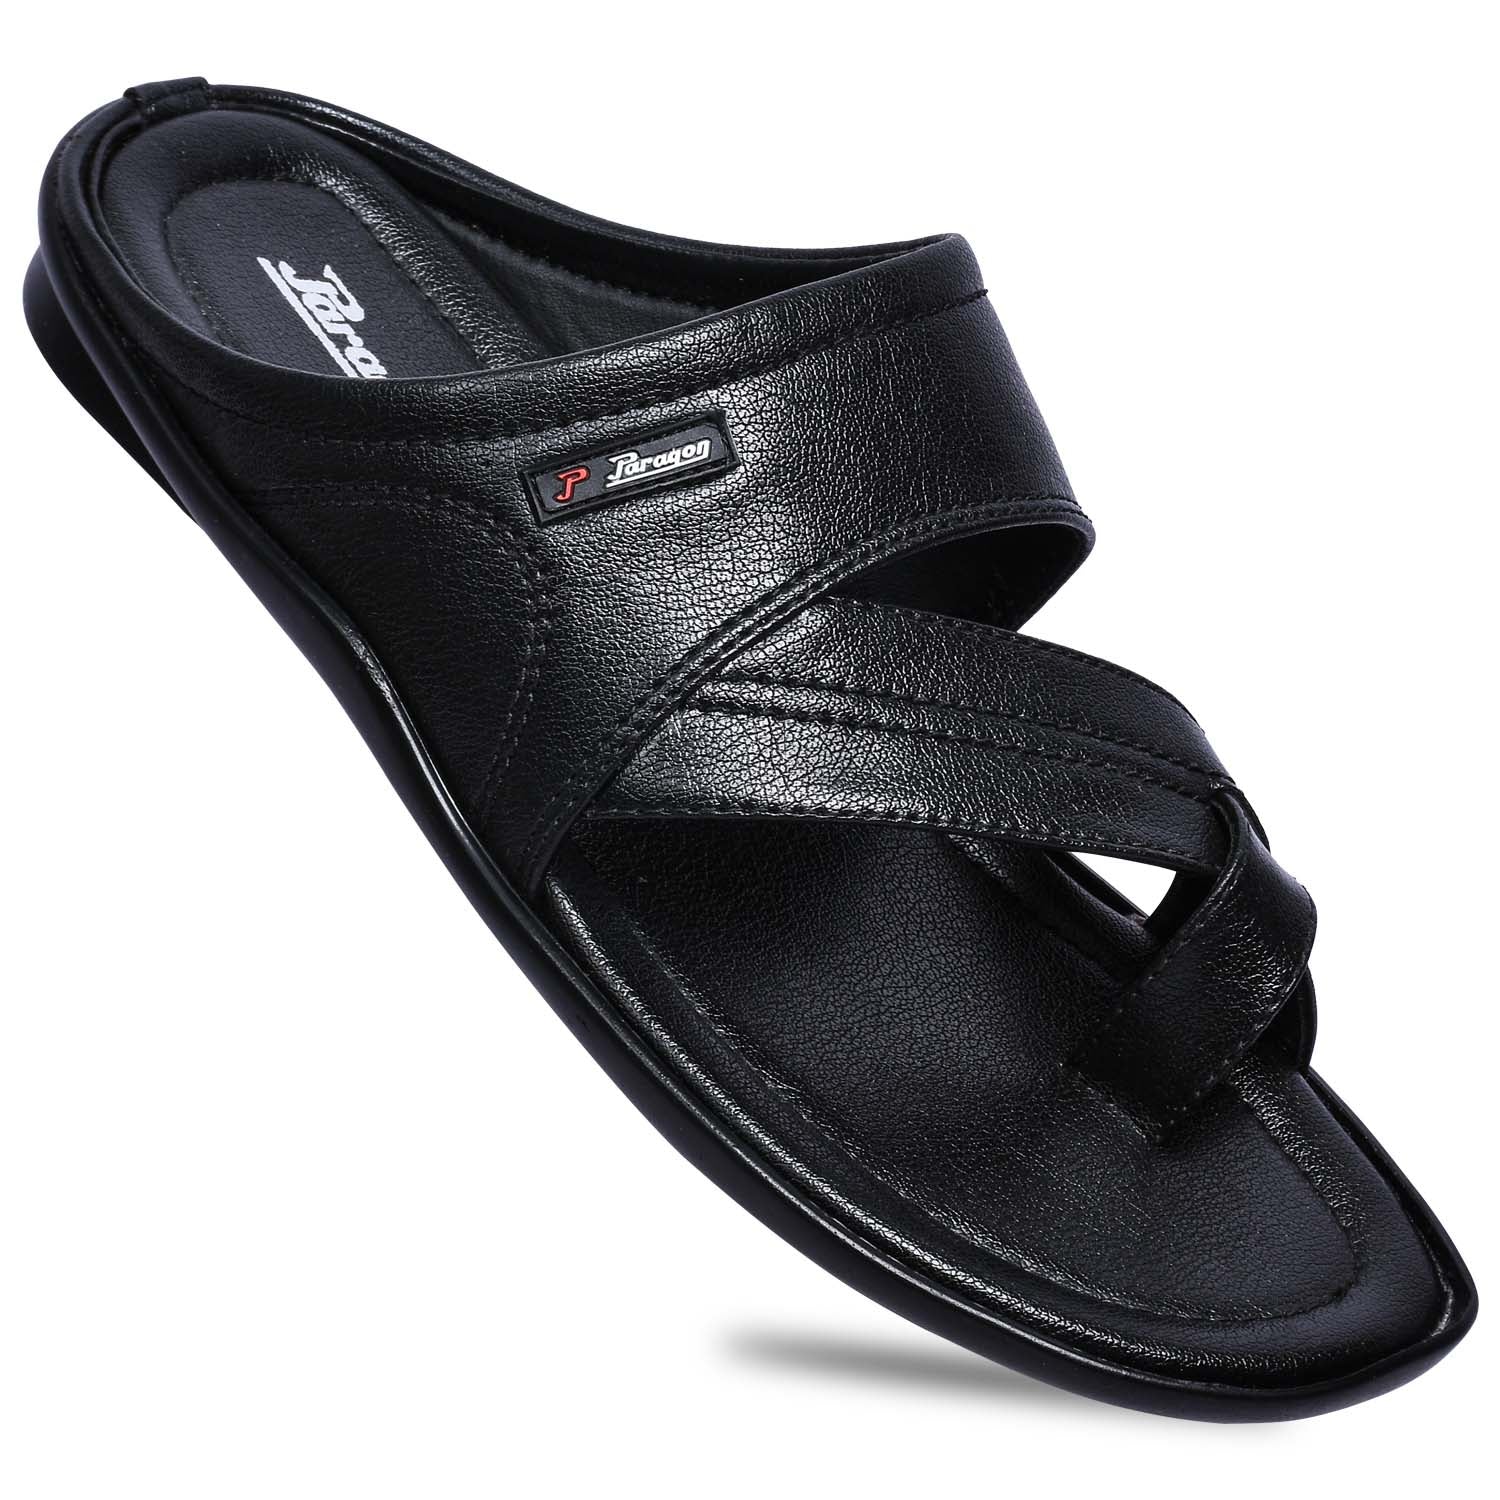 Paragon R4003G Men Stylish Sandals | Comfortable Sandals for Daily Outdoor Use | Casual Formal Sandals with Cushioned Soles